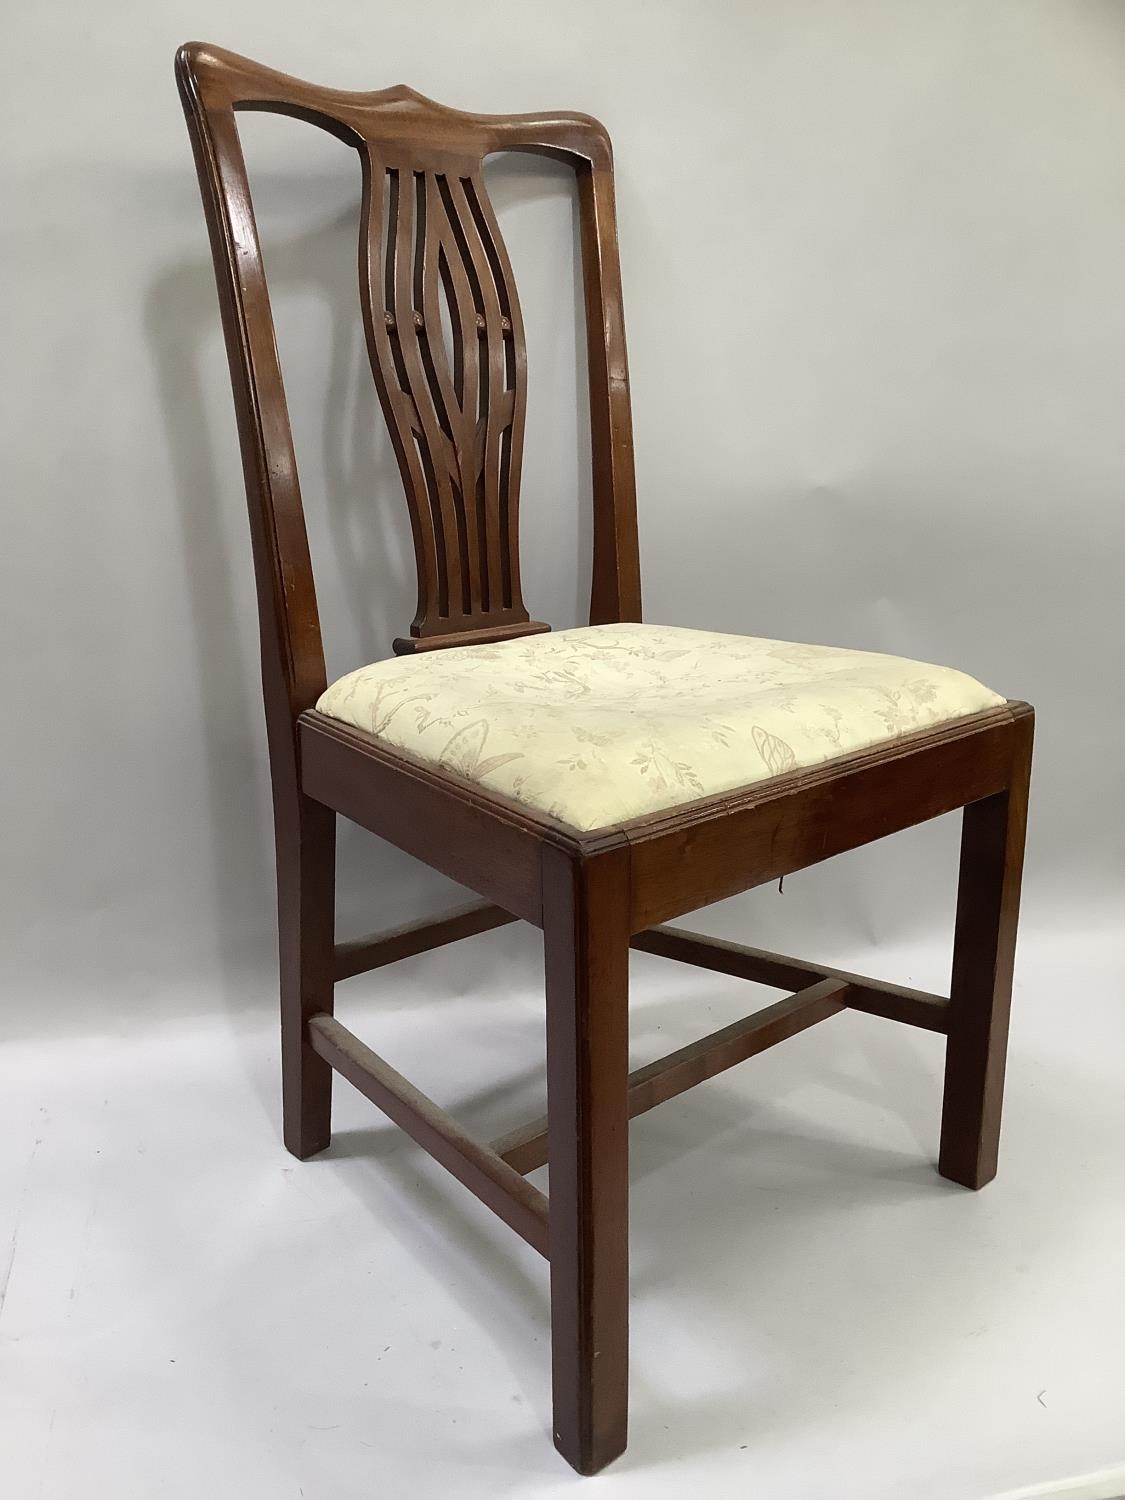 A mahogany splat back Georgian chair, on square legs, cream upholstered fabric - Image 2 of 2